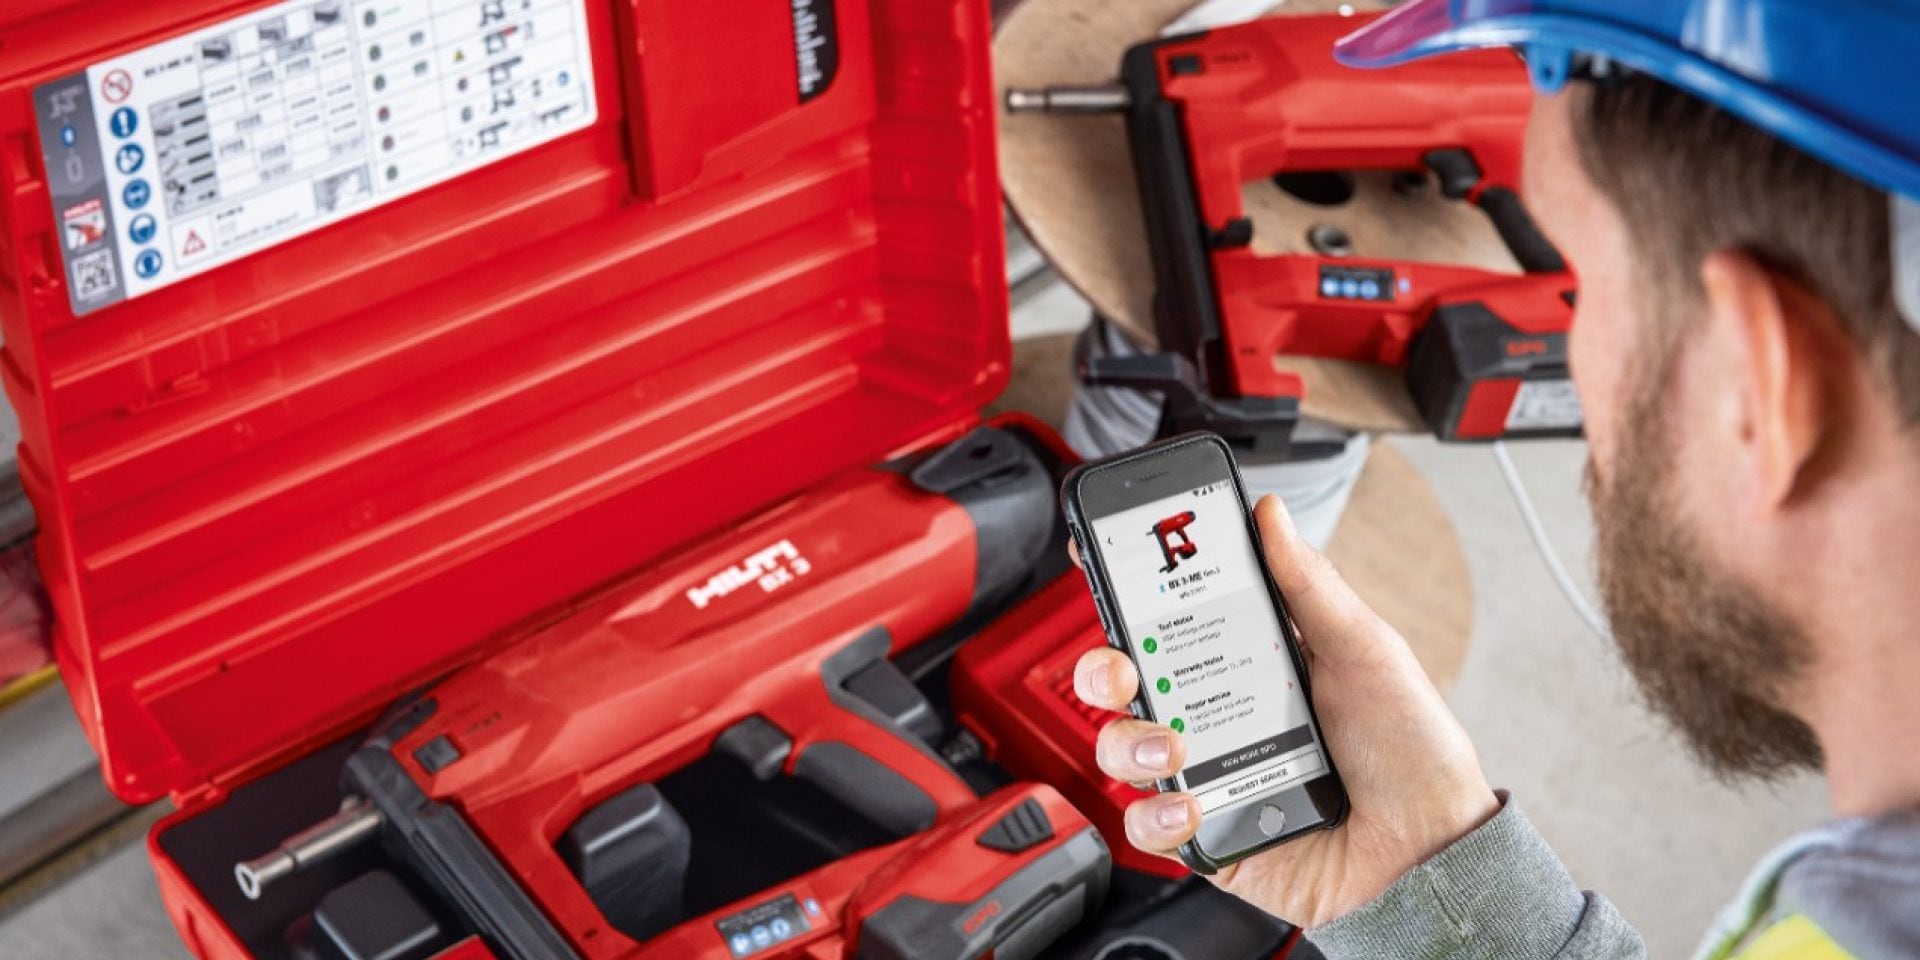 Make it smart! The BX 3 cordless nailer has built-in Bluetooth technology which can be used with the Hilti Connect App for hassle-free tool services directly at your fingertips